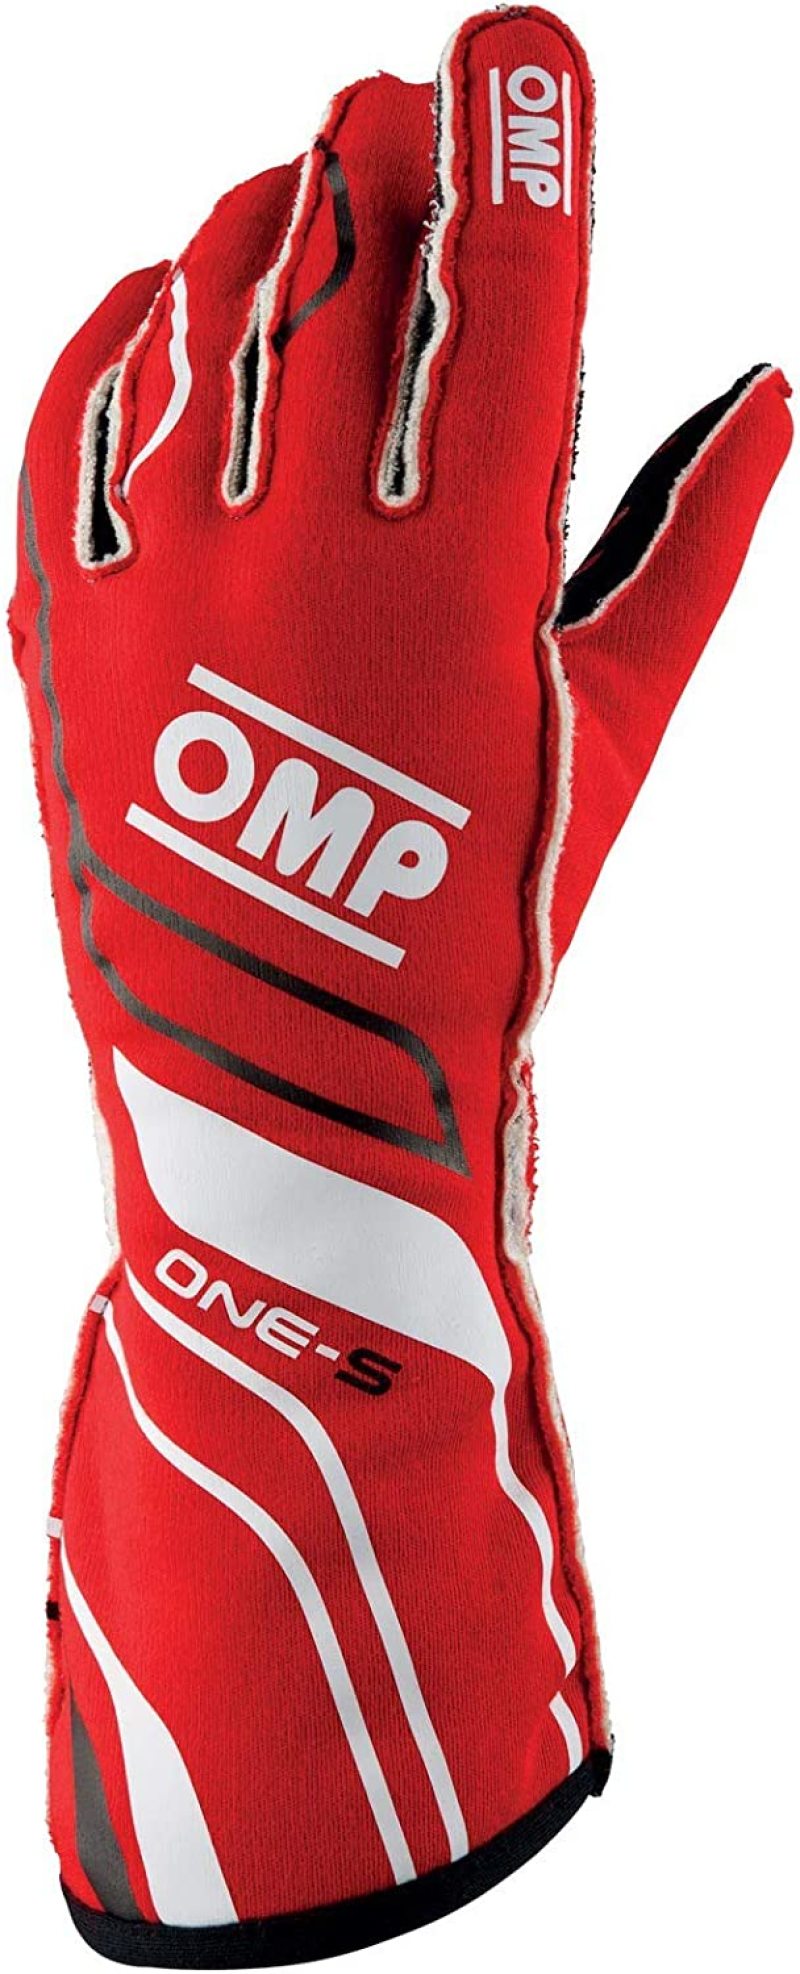 OMP One-S Gloves Red - Size S Fia 8556-2018 - IB0-0770-A01-061-S